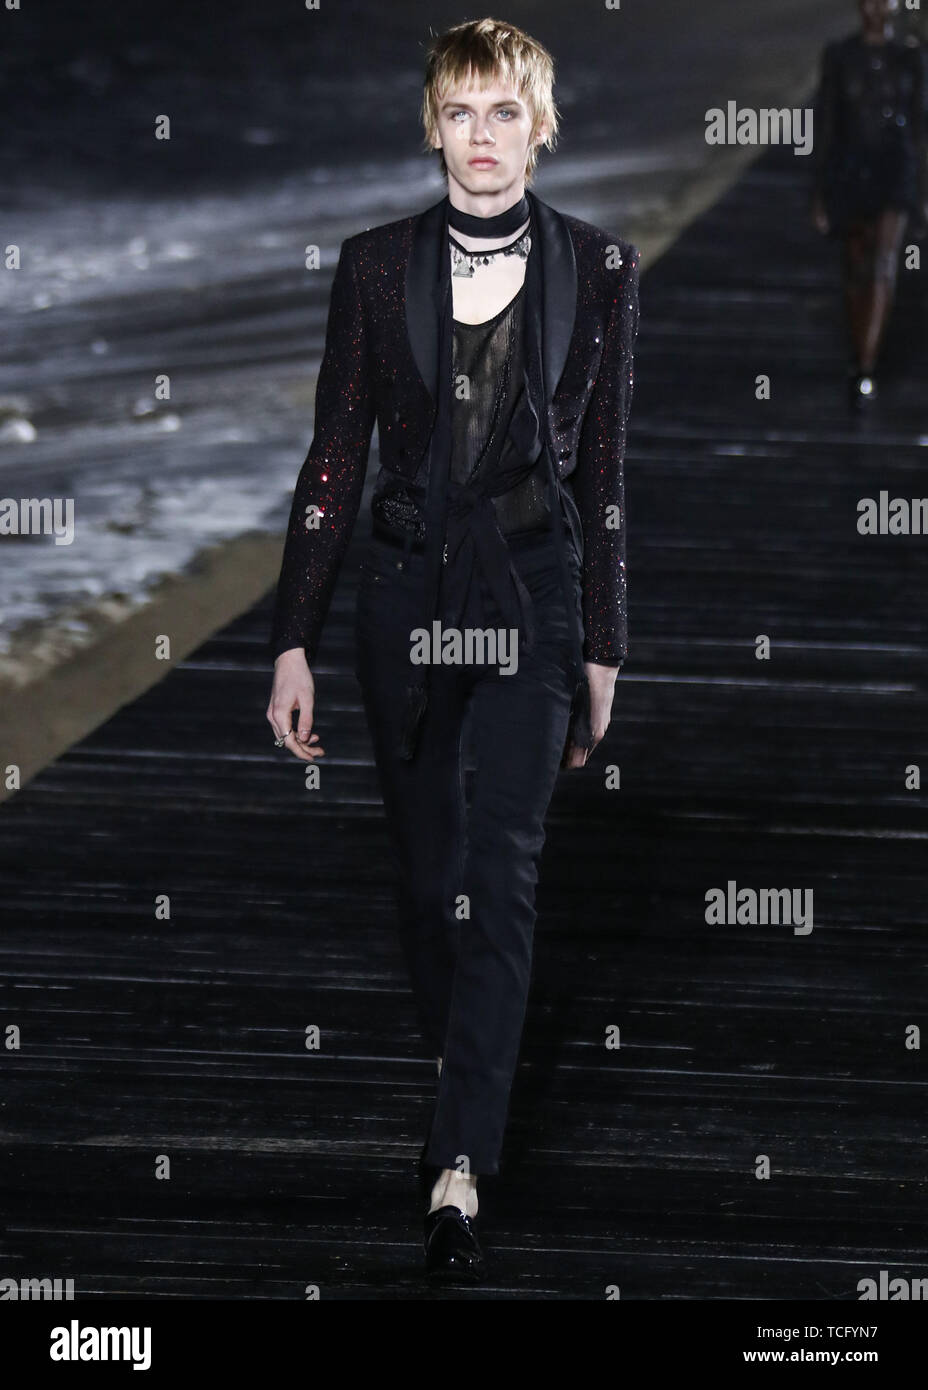 Page 3 - Ysl Catwalk High Resolution Stock Photography and Images - Alamy